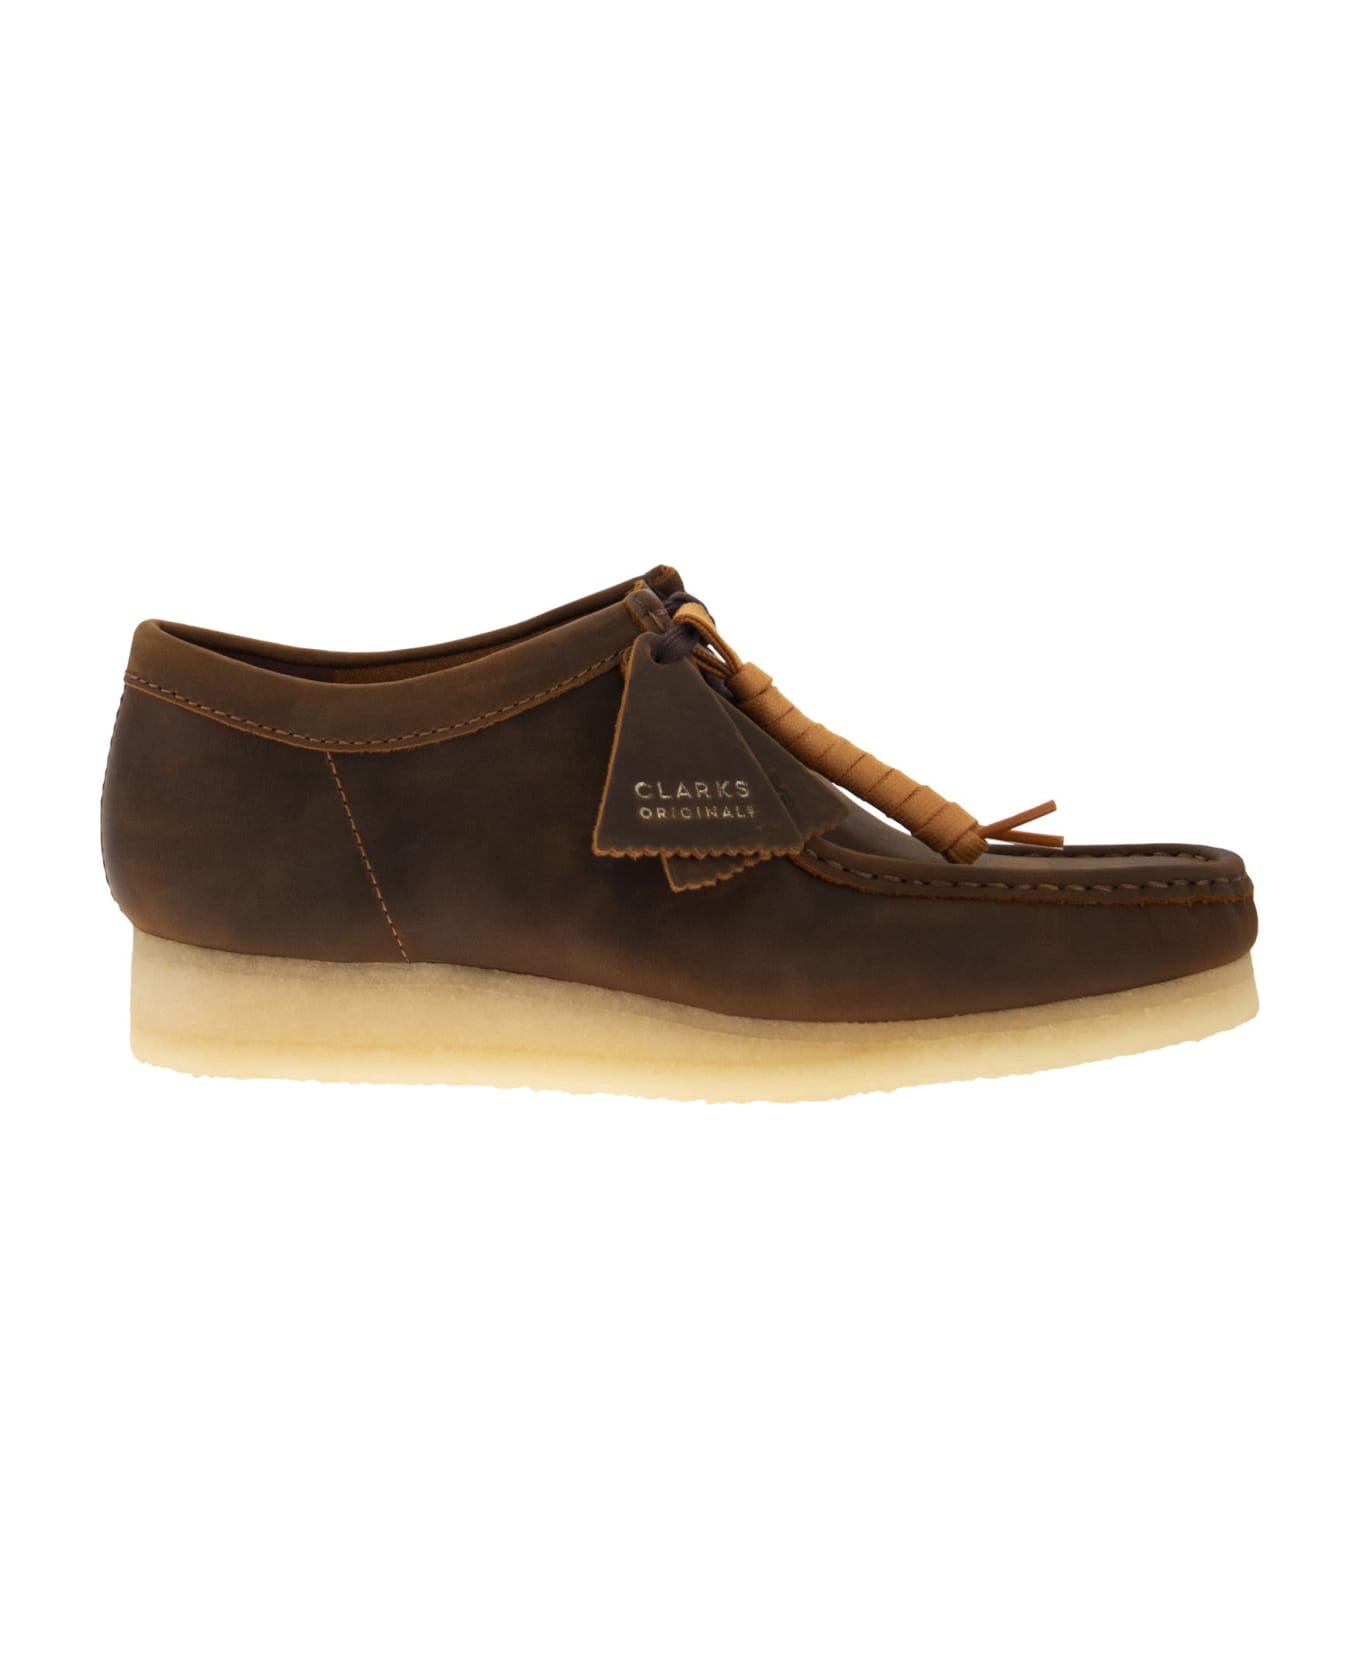 Clarks Wallabee - Suede Leather Shoe - Chocolate